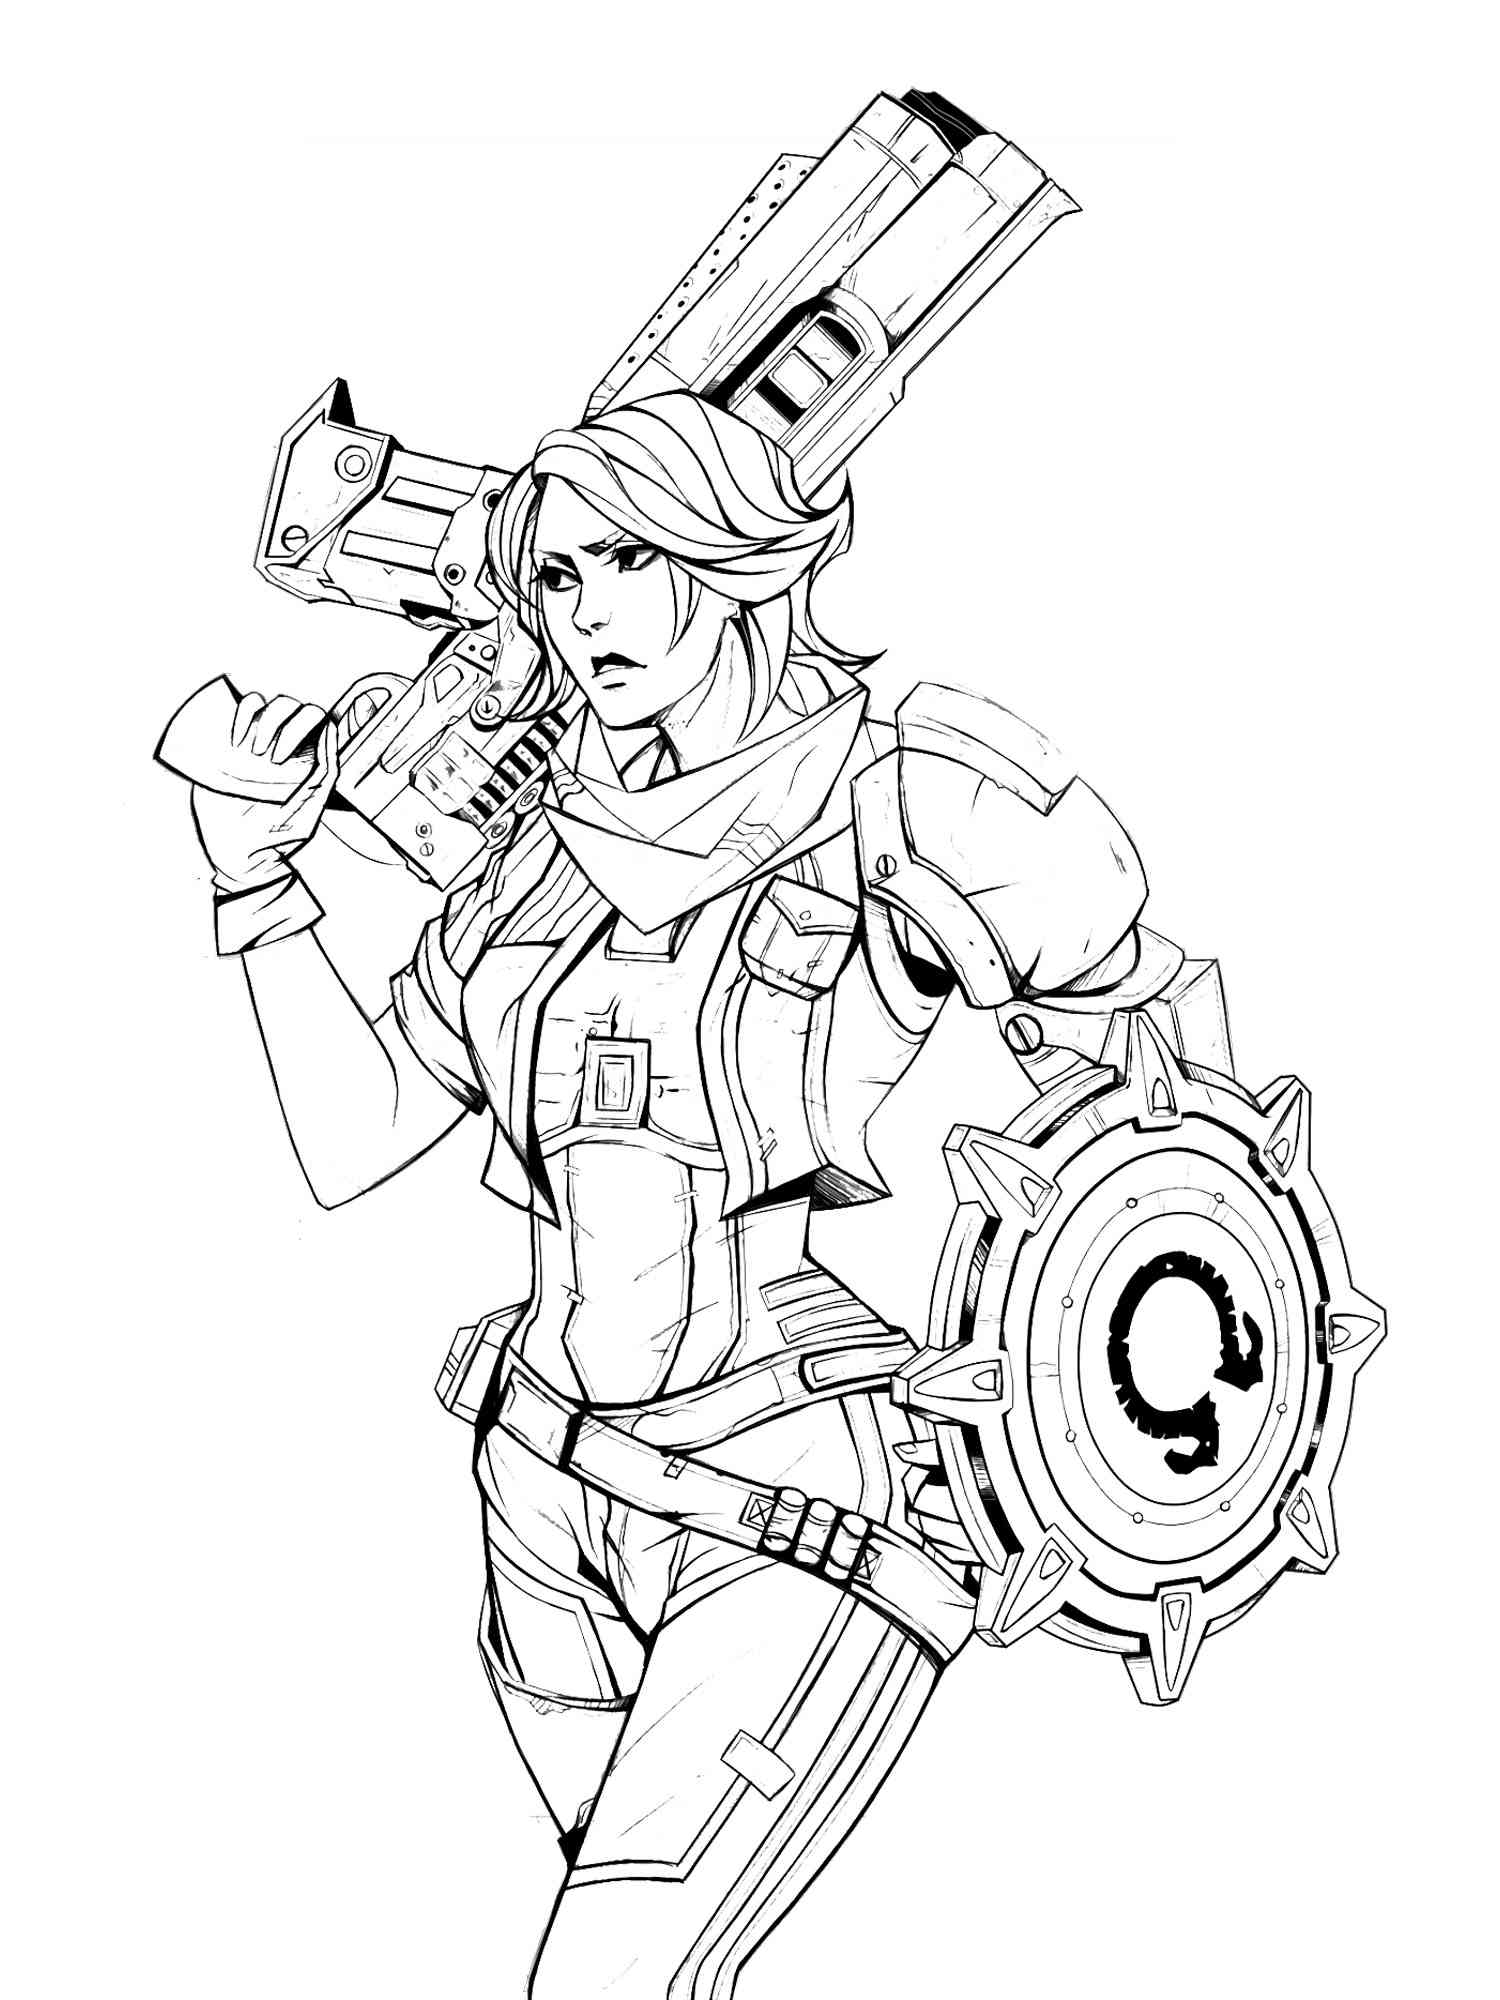 Athena from Borderlands coloring page